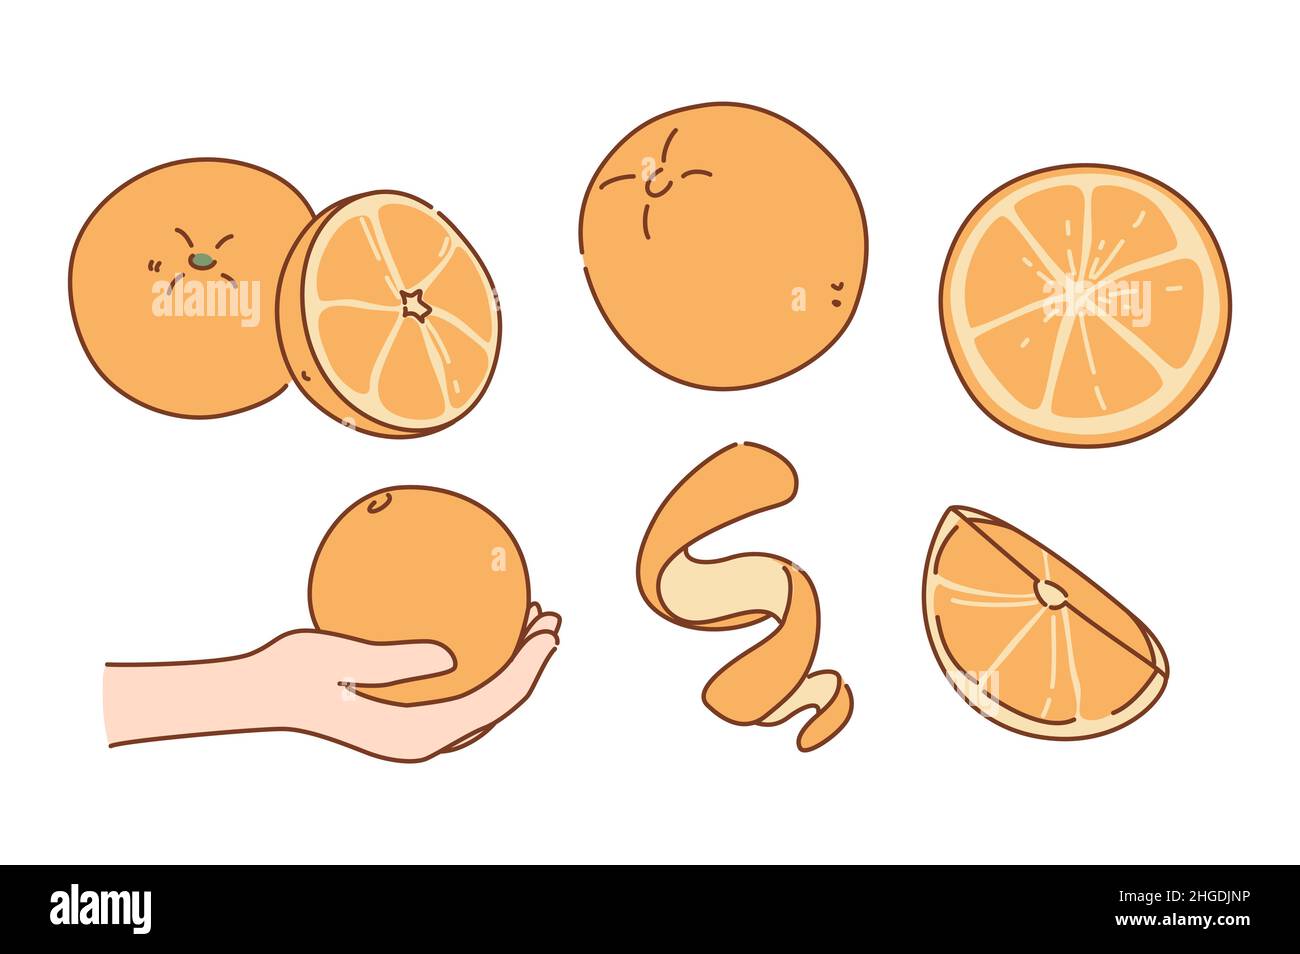 Set of juicy fresh oranges sliced or whole. Collection of organic bio tasty mandarin or tangerine. Healthy fruit eating. Good habit concept. Gardening and farming nature product. Vector illustration.  Stock Vector